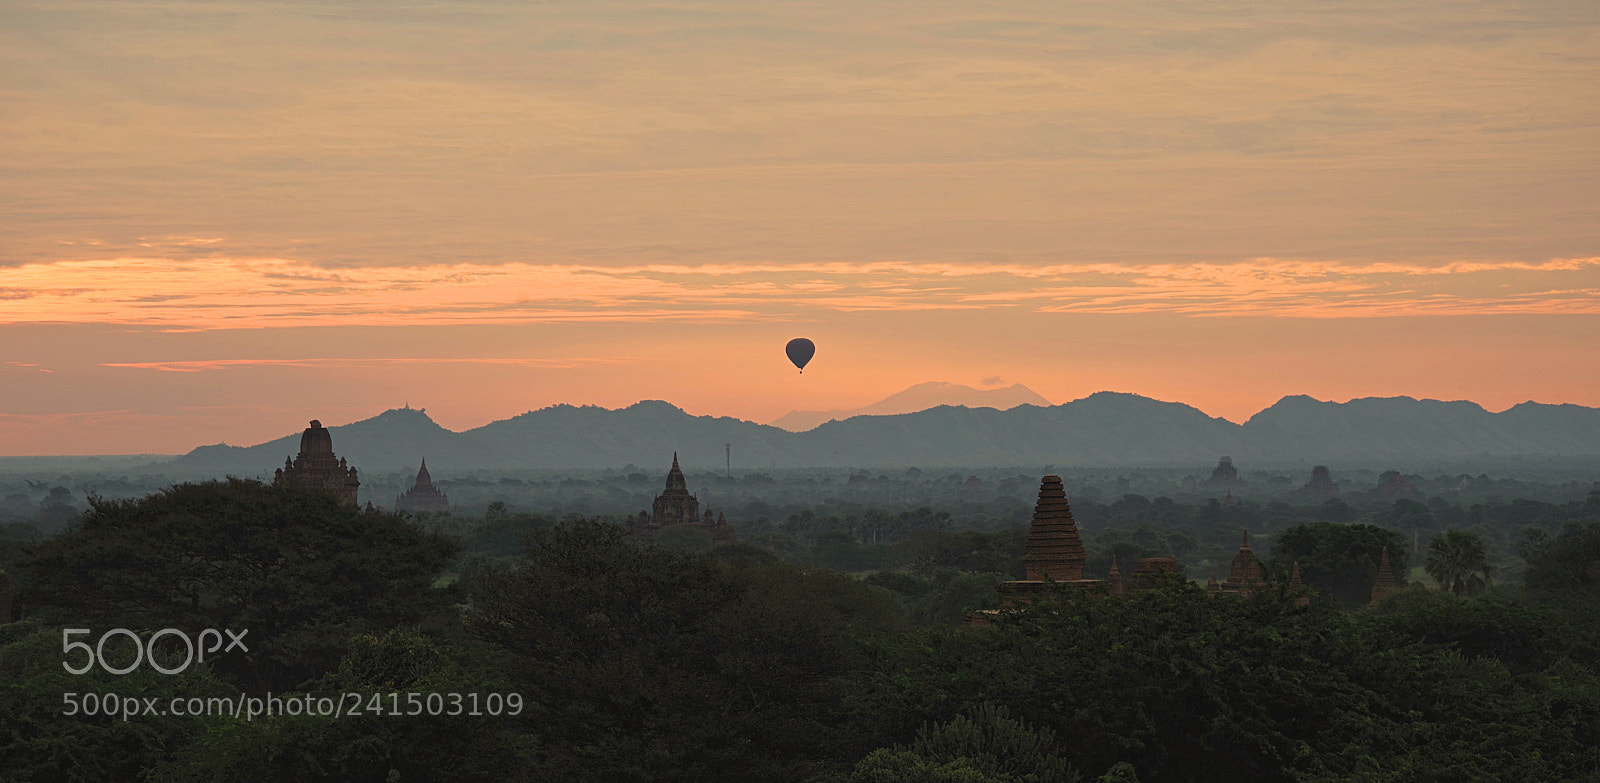 Pentax K-1 sample photo. Sunrise over temples of photography